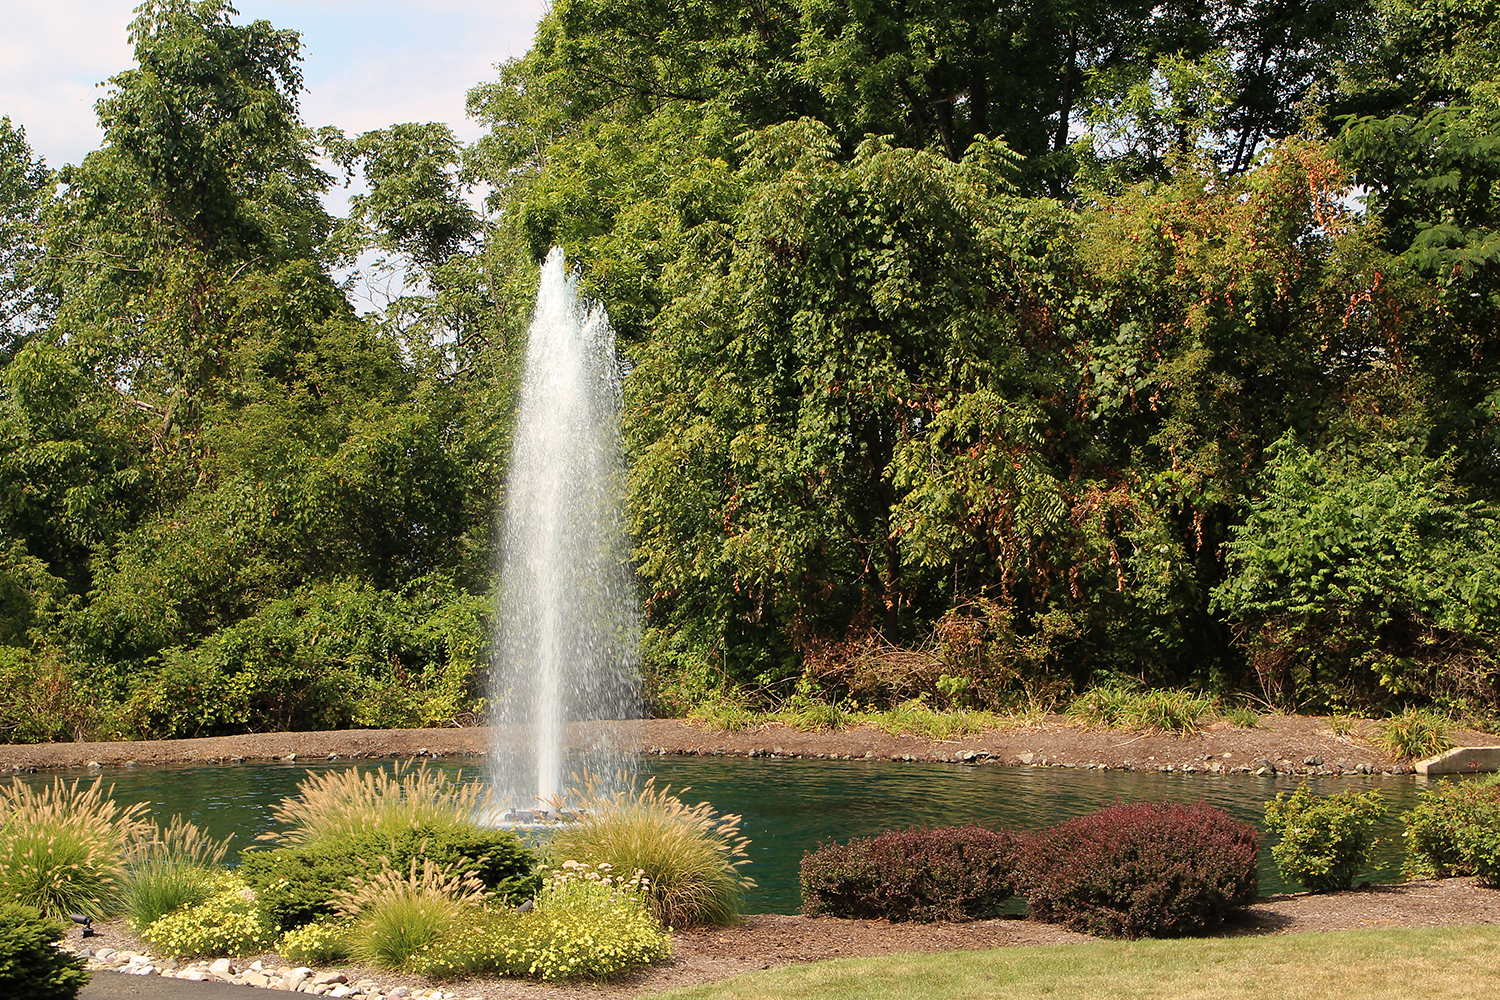 One of Otterbine's Comet Aerating Fountains in a park